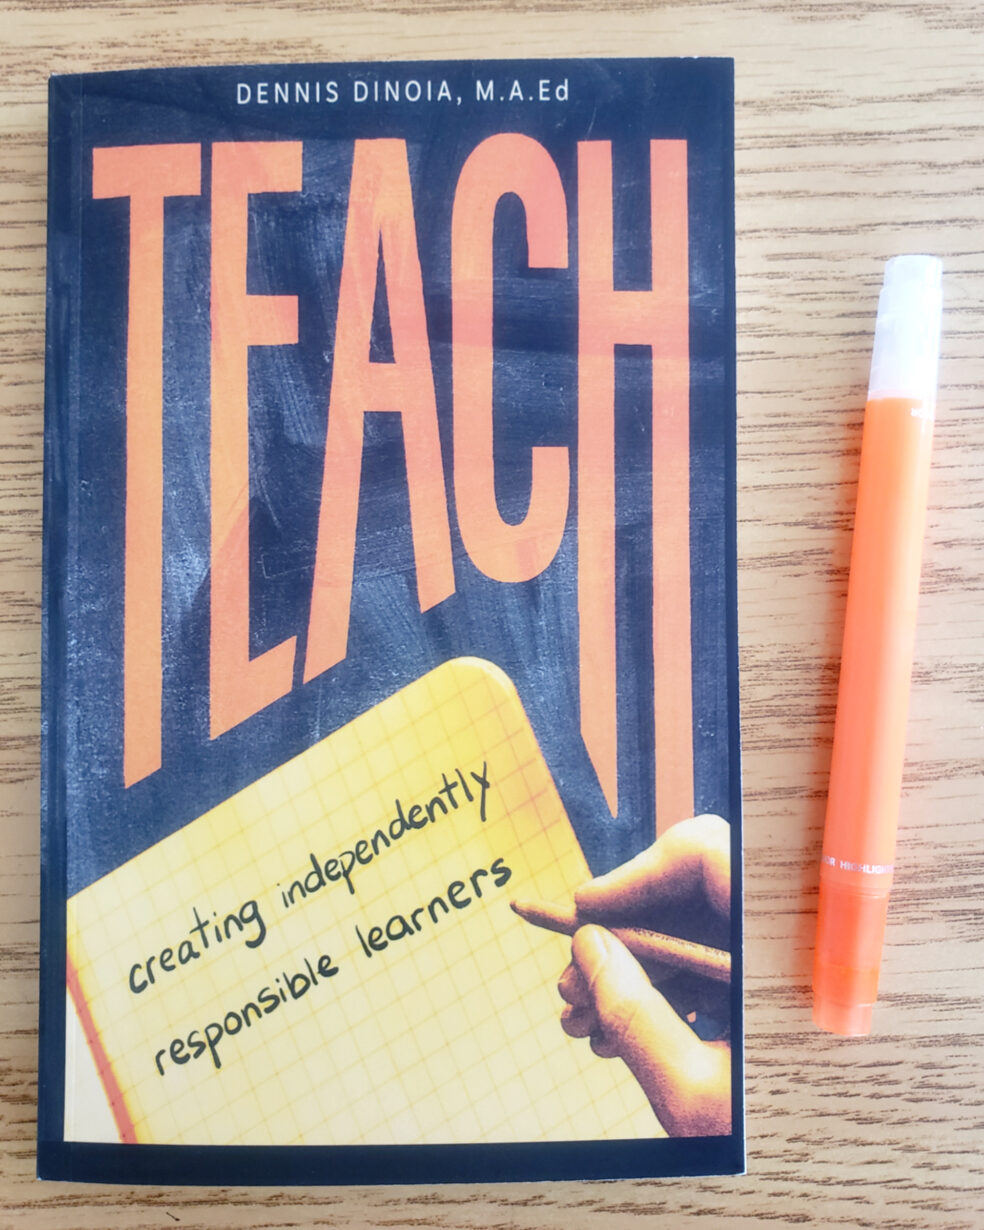 Photo of  the book TEACH by Dennis Dinoia lying on a wooden table with an orange highlighter lying beside it